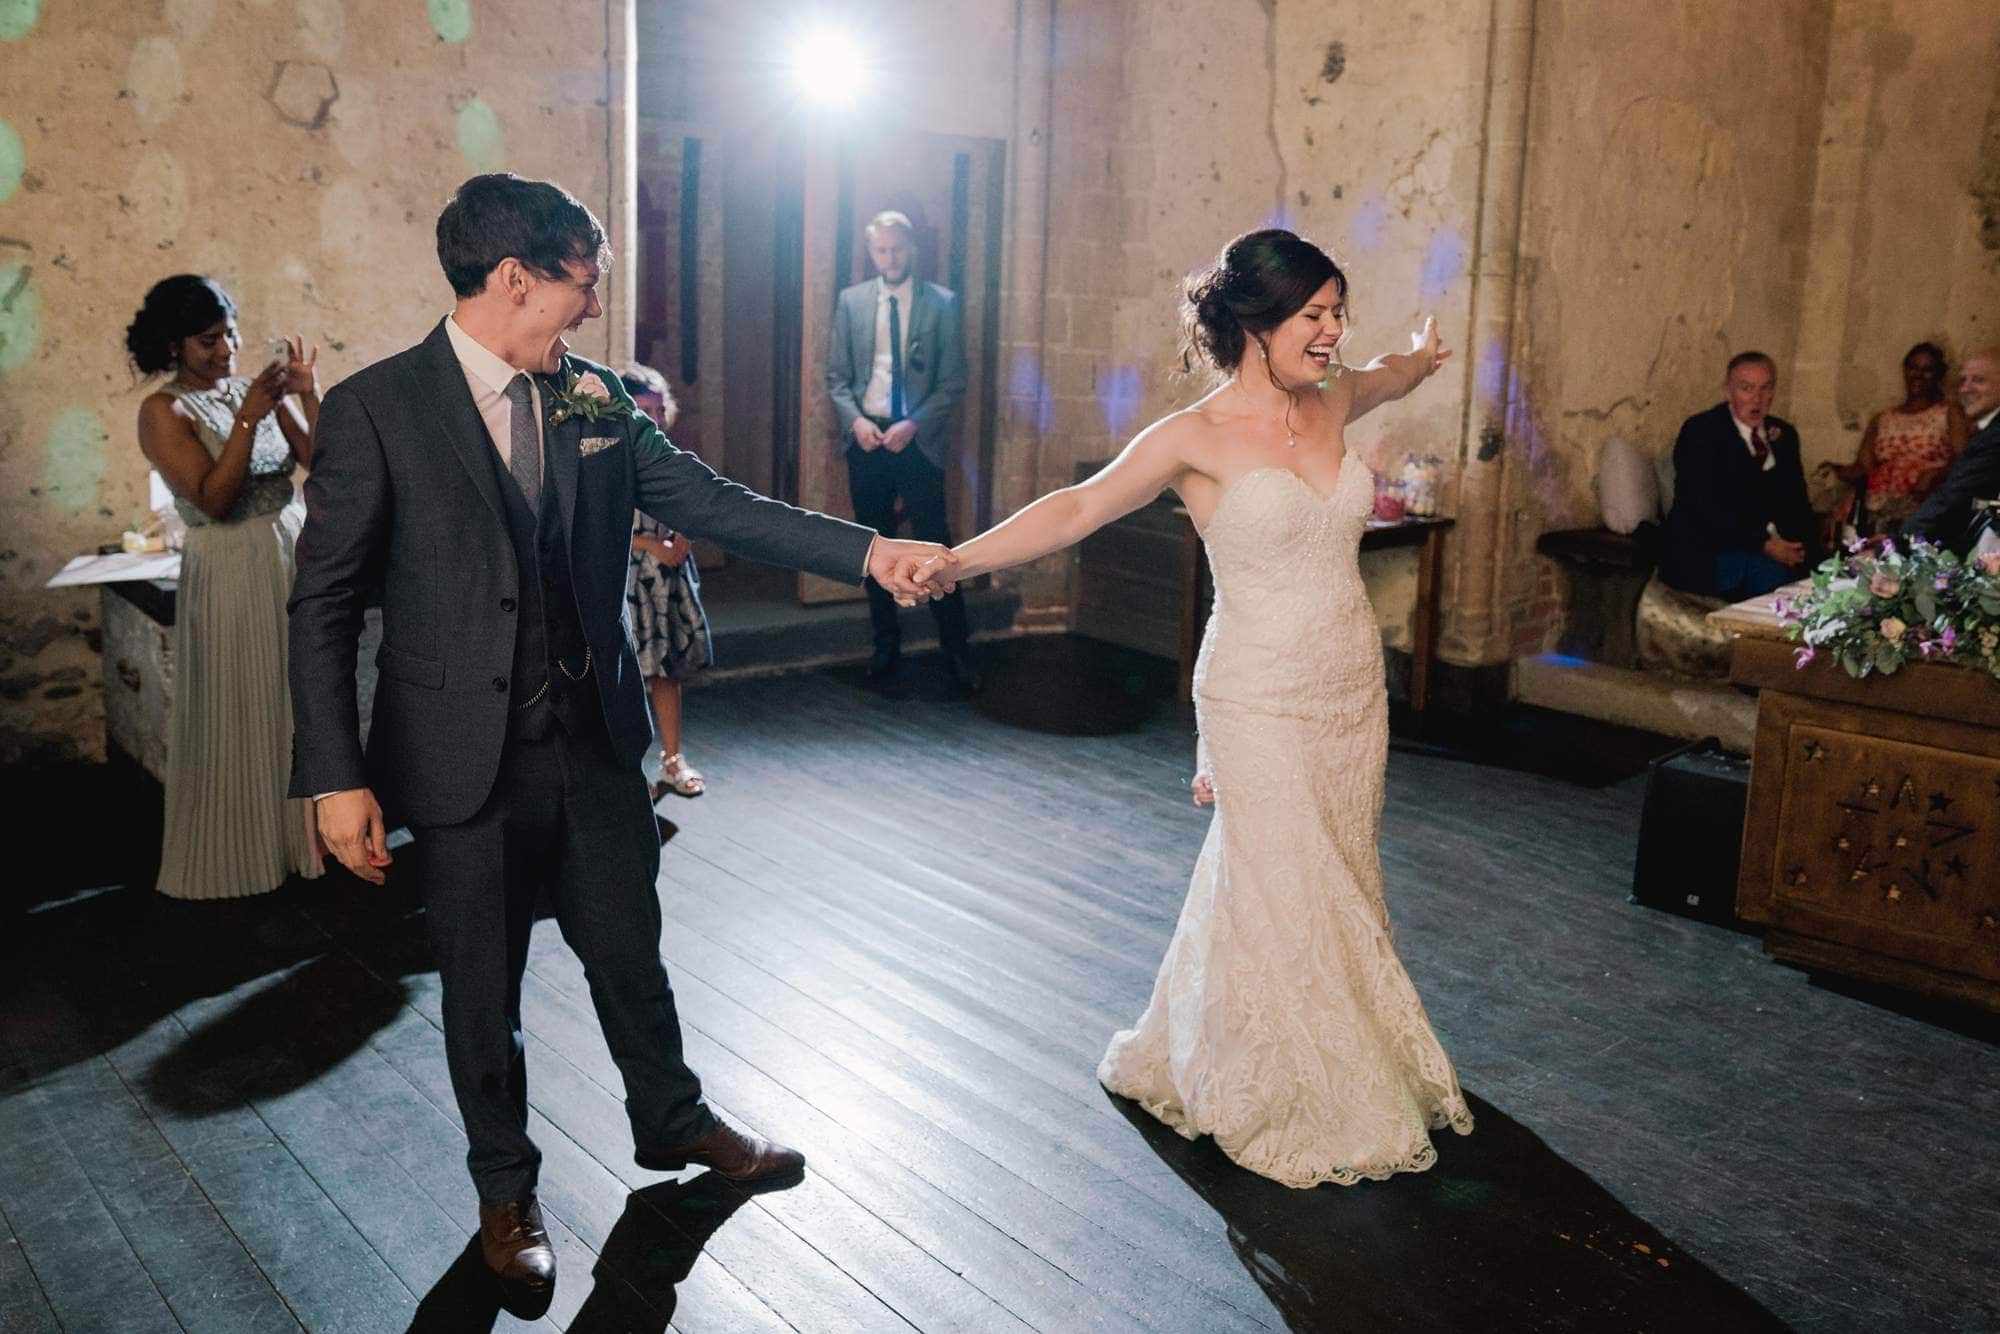 Bride and groom have their first dance together on their wedding day.